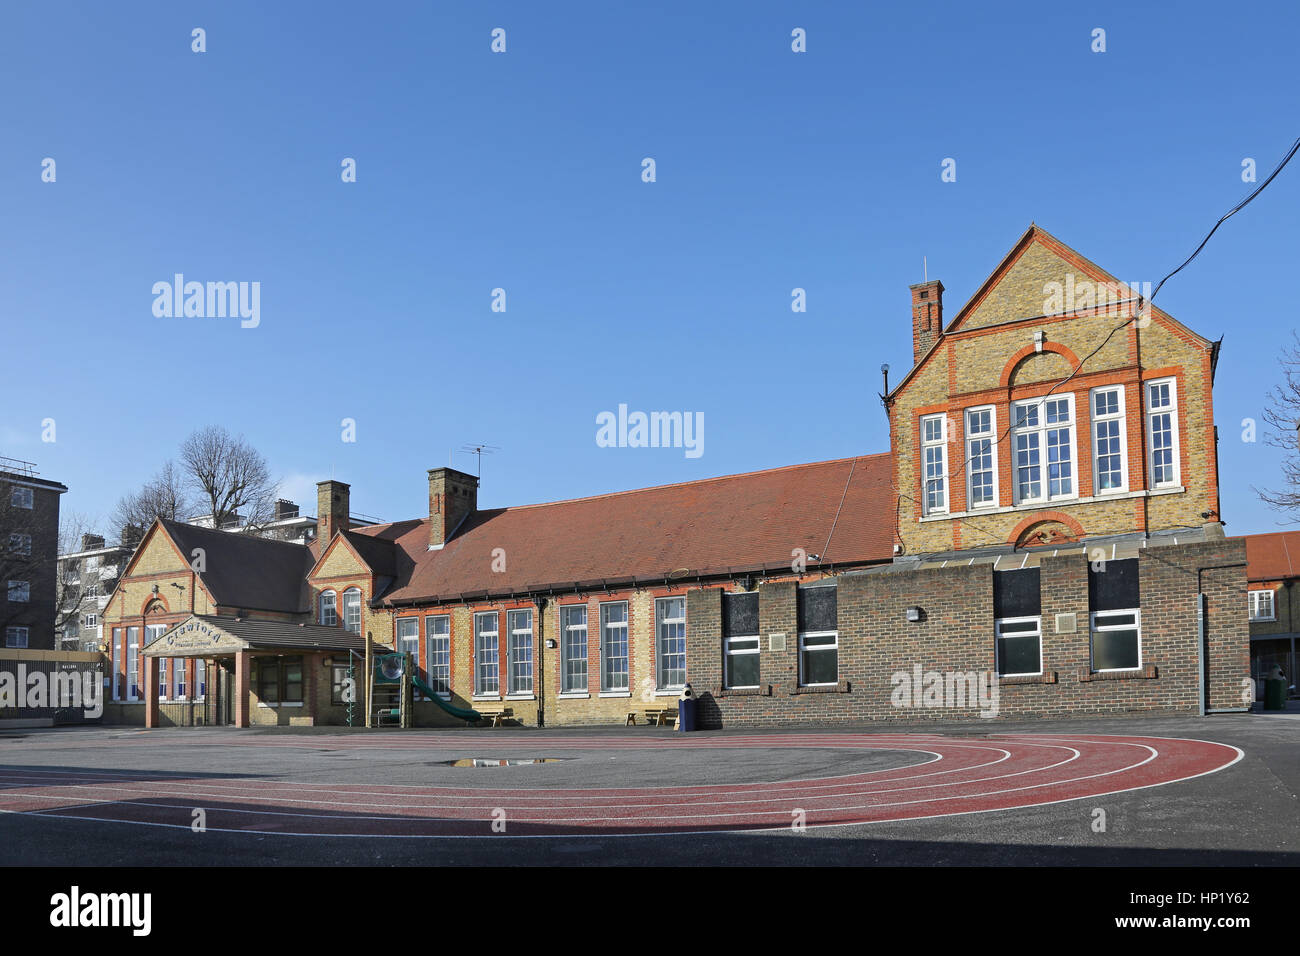 Exterior view of a typical Victorian London school building following refurbishment Stock Photo